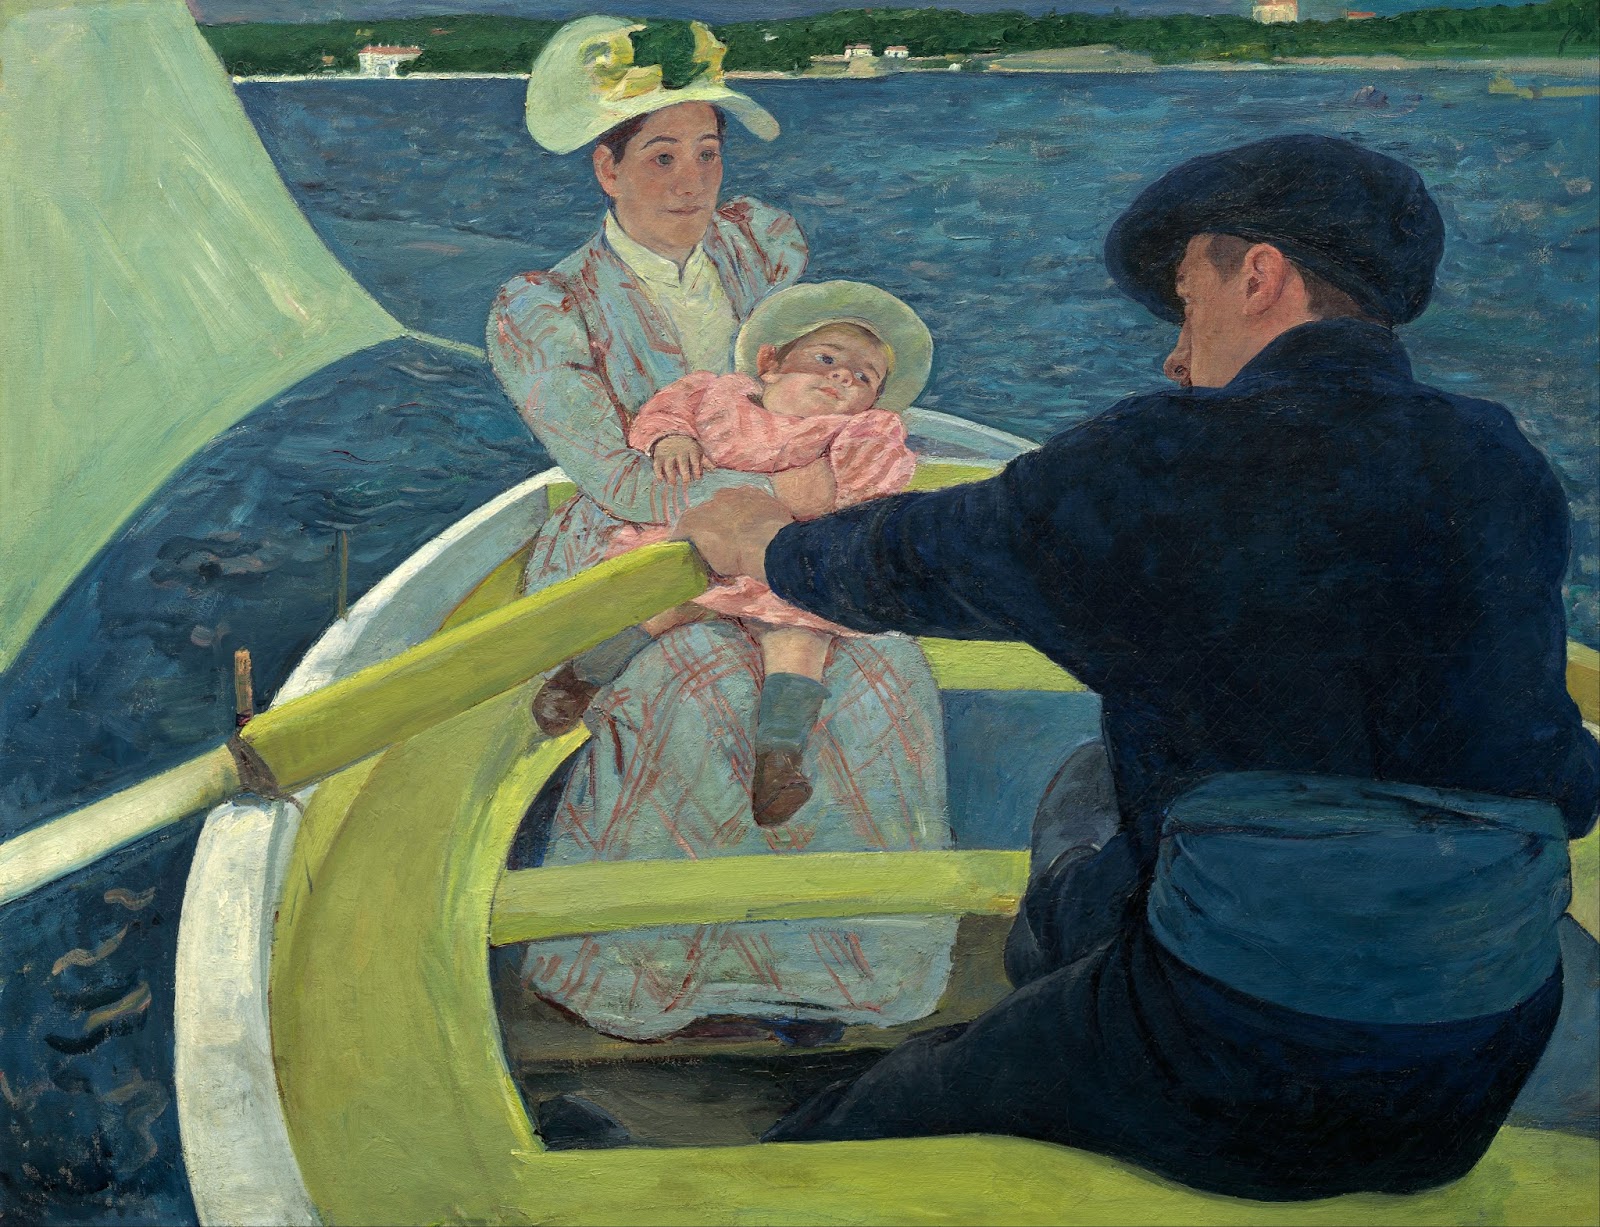 The Boating Party by Mary Cassatt - 1893–1894 - 90 x 117 cm National Gallery of Art